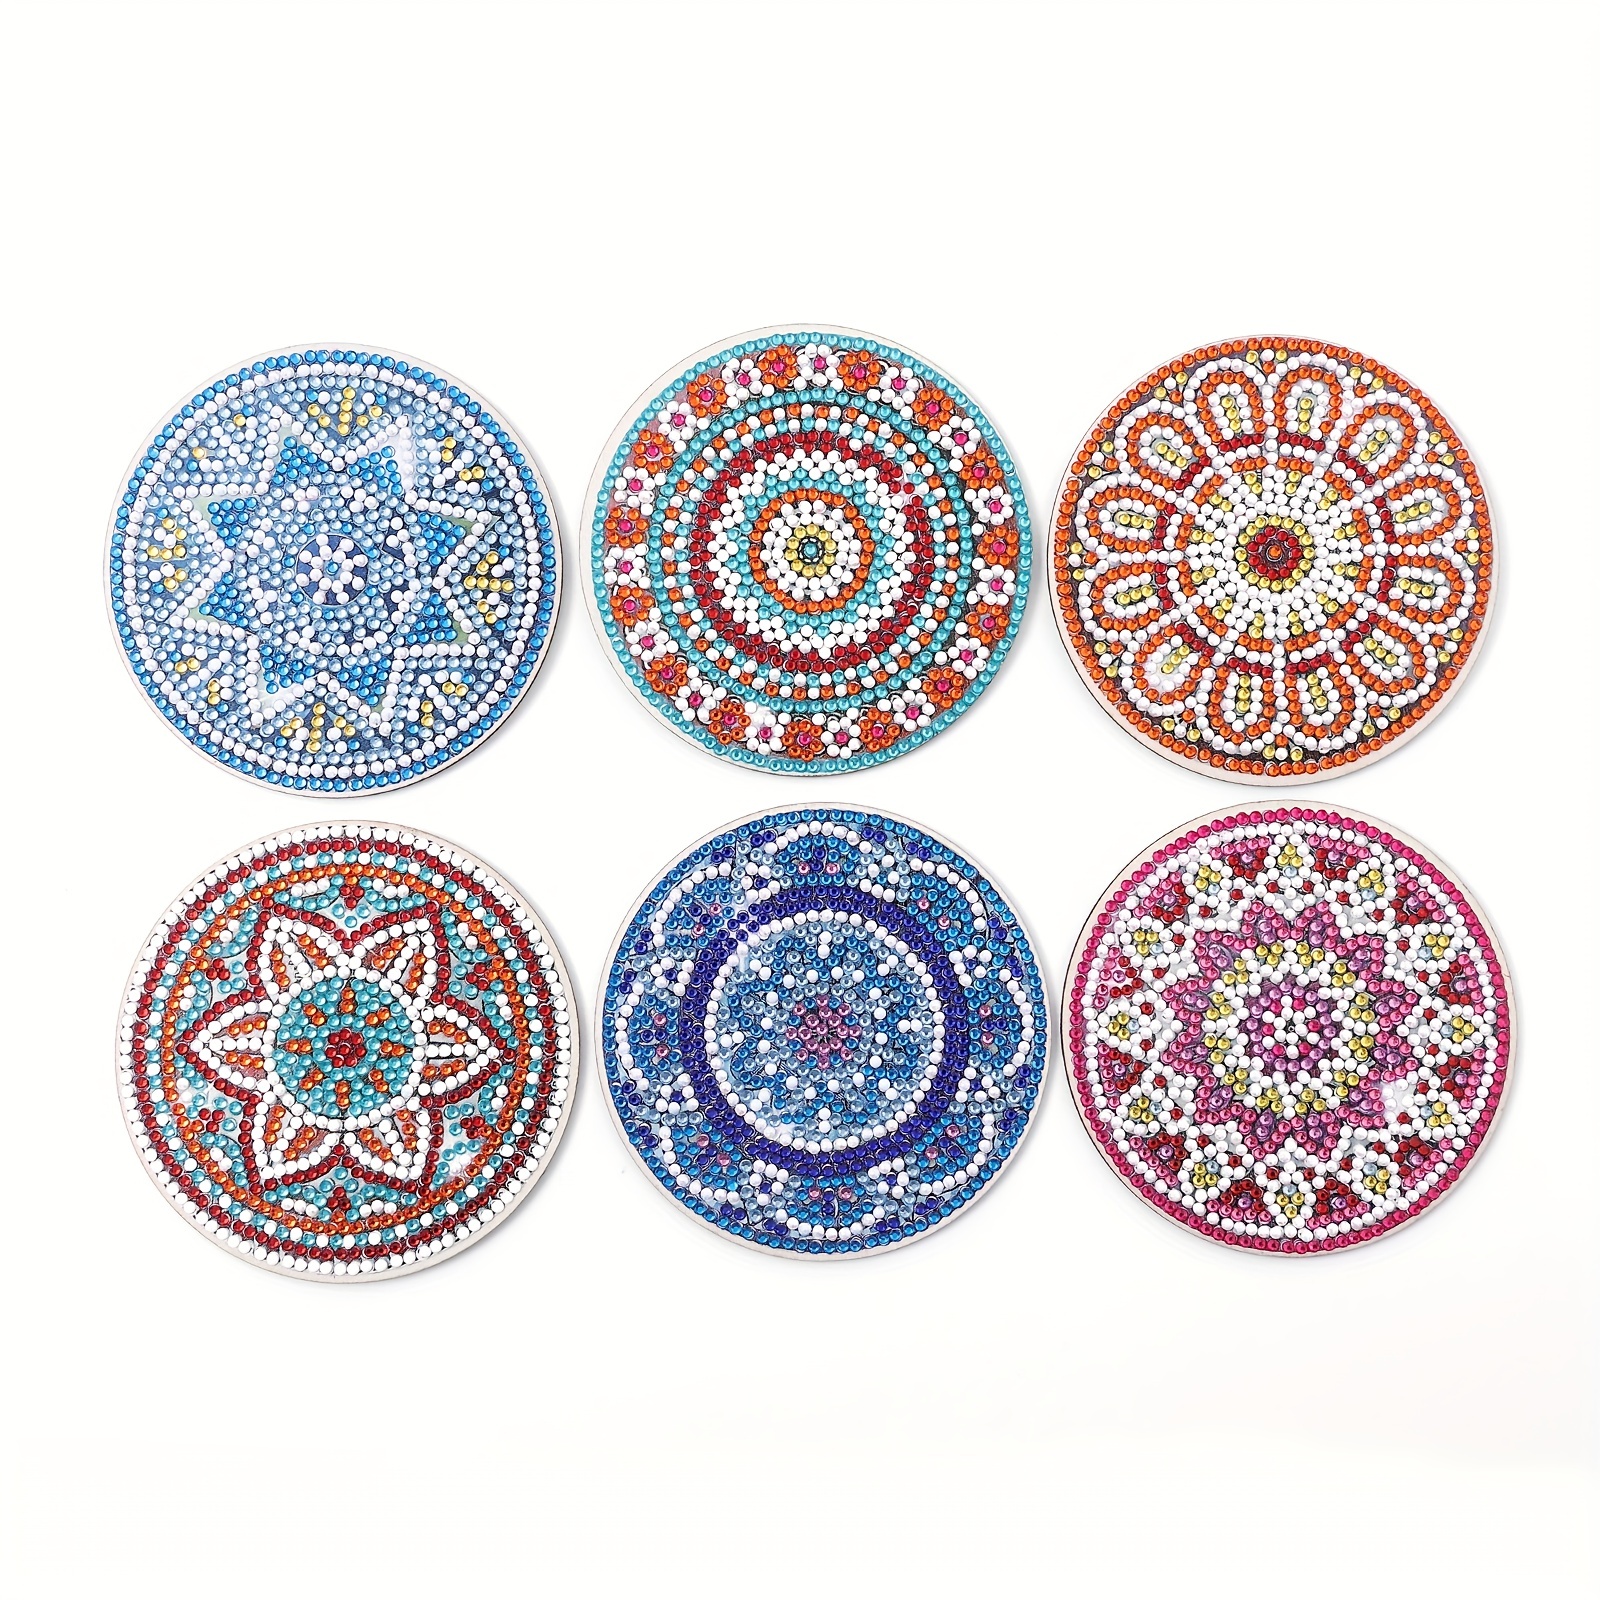 6 Pcs Diamond Painting Coasters with Holder, DIY Mandala Coasters Diamond Painting Kits for Beginners, Adults & Kids Art Craft Supplies, Size: 12